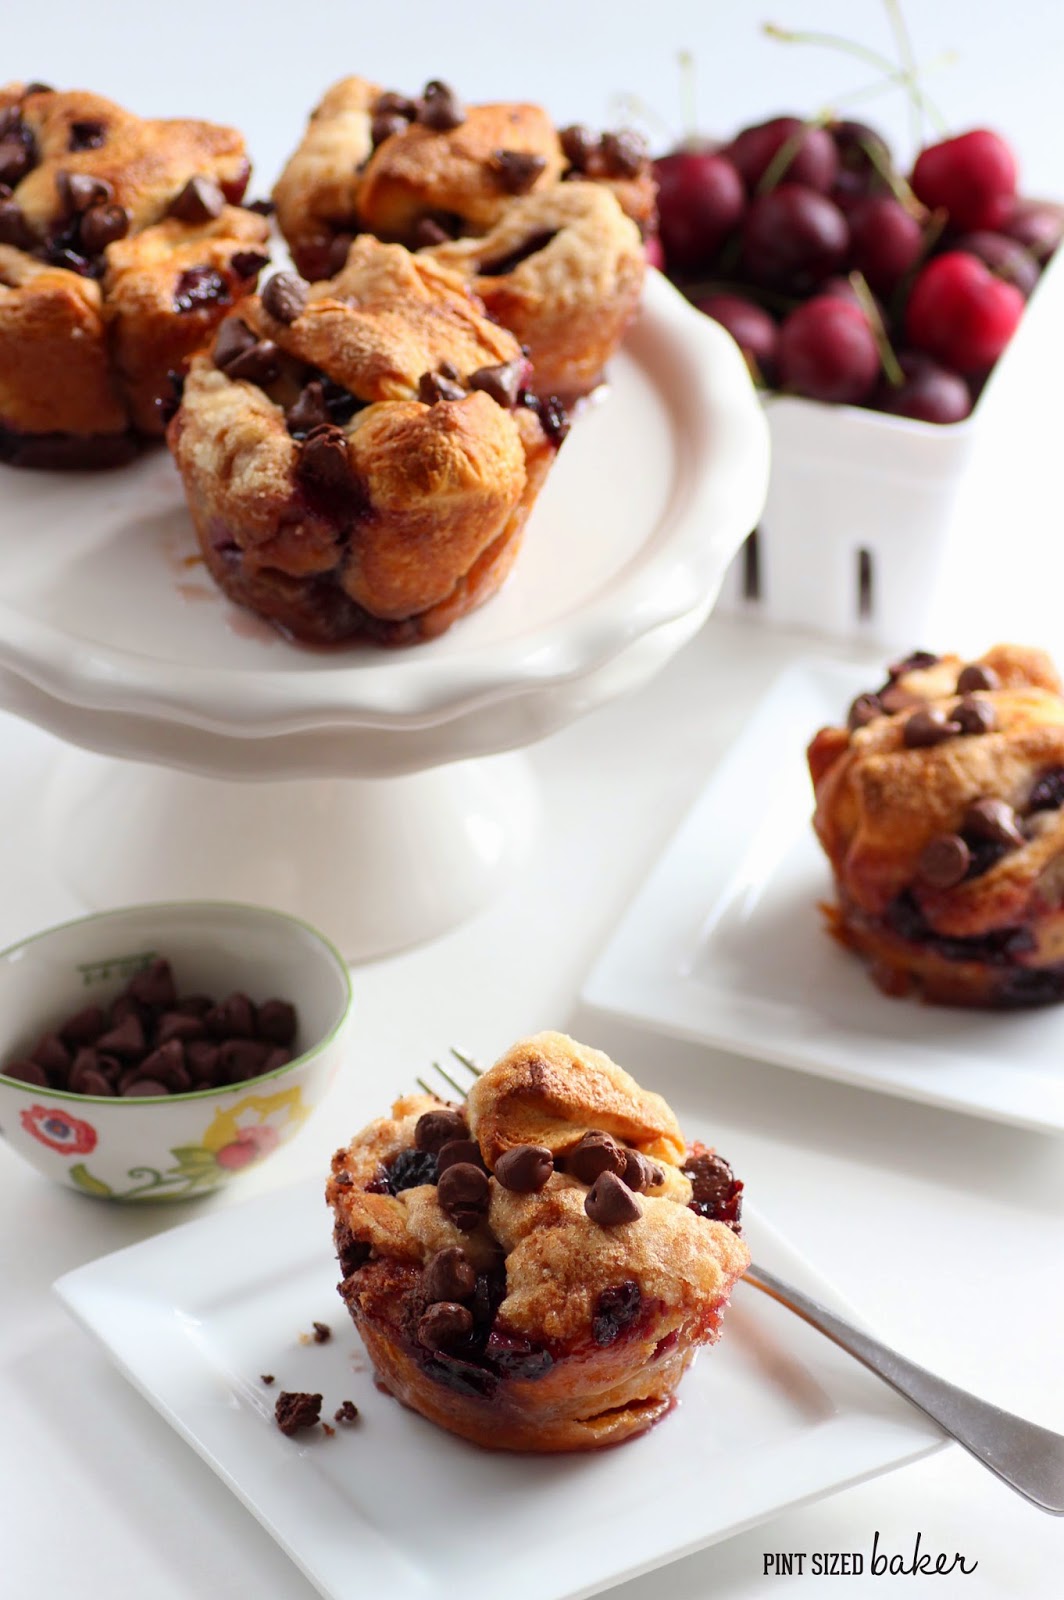 Cherry Stuffed Monkey Bread with Chocolate Chips is great for breakfast or dessert.